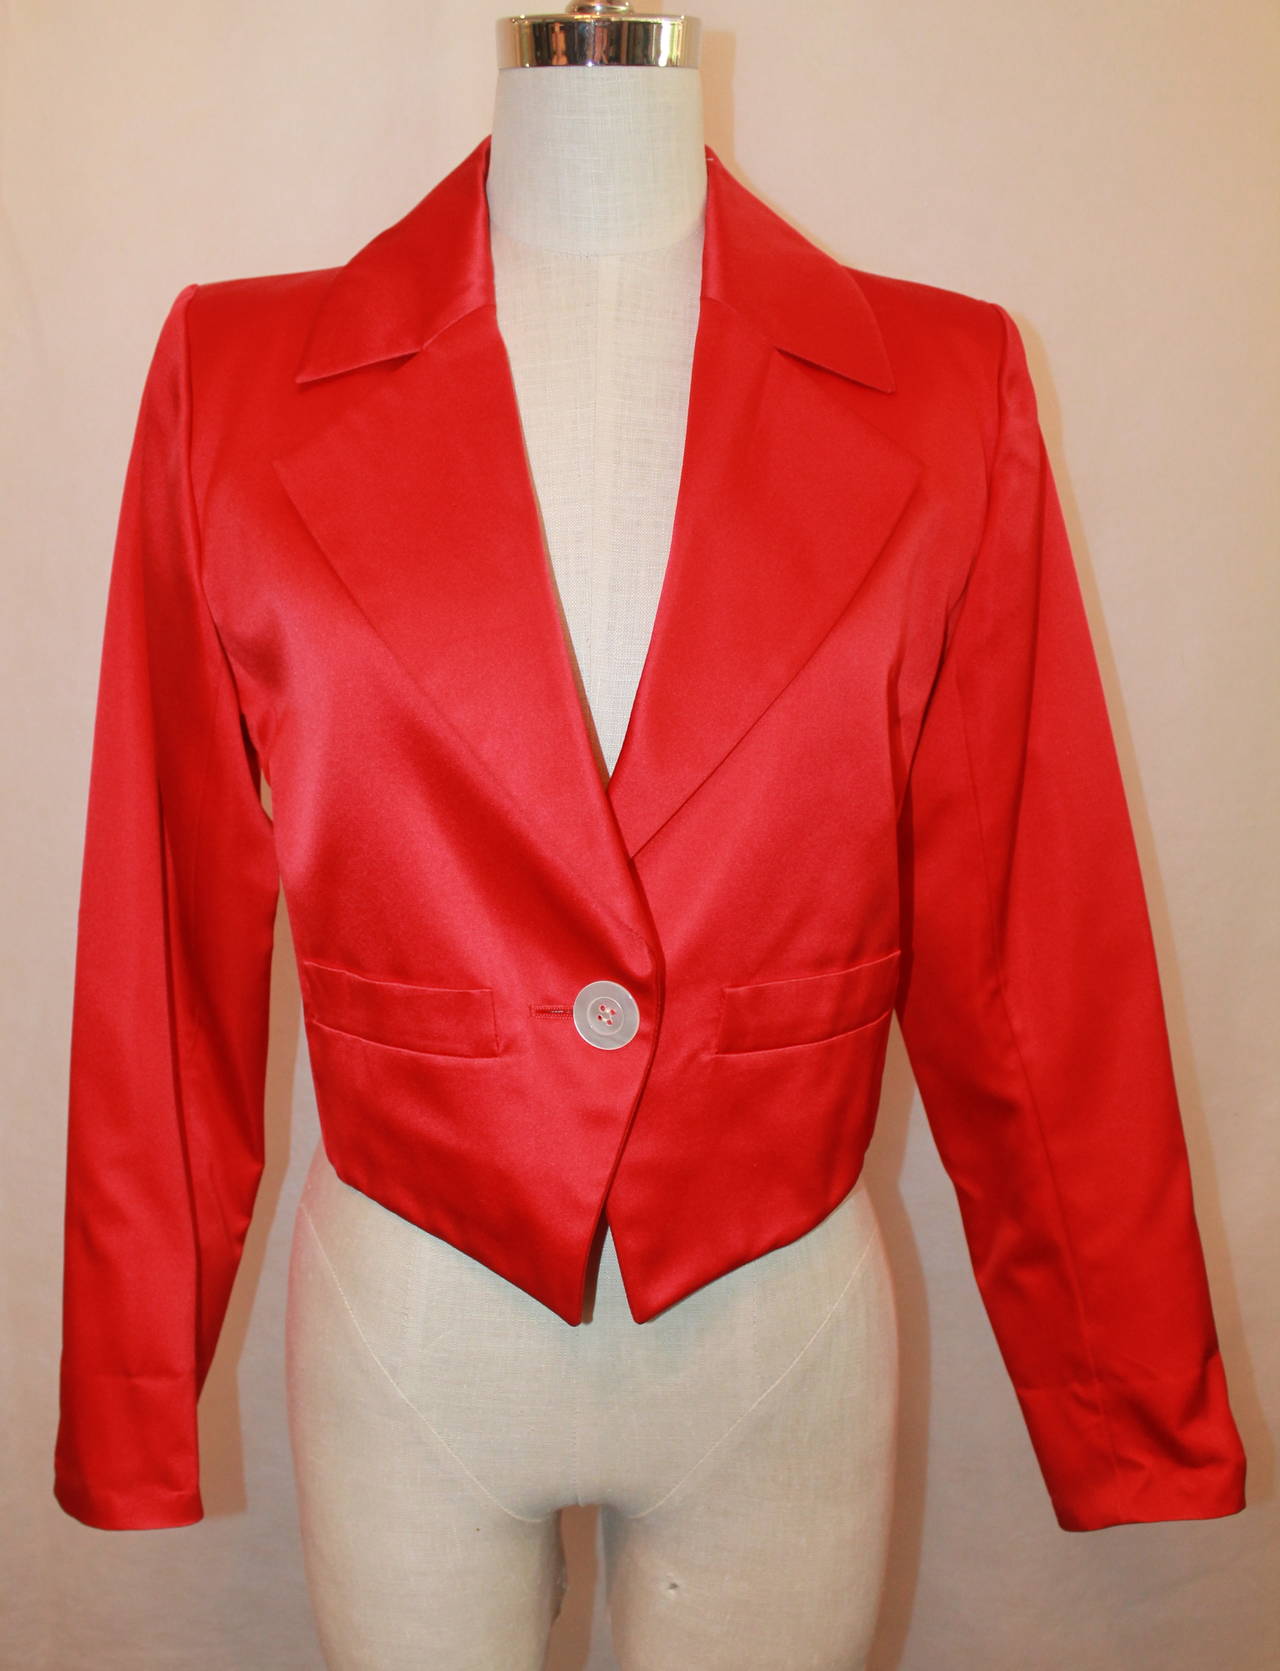 Vintage 1990s Yves Saint Laurent Red Size 36 Satin Bolero Jacket with Single Mother of Pearl Button.

Measurements:
Bust: 38 